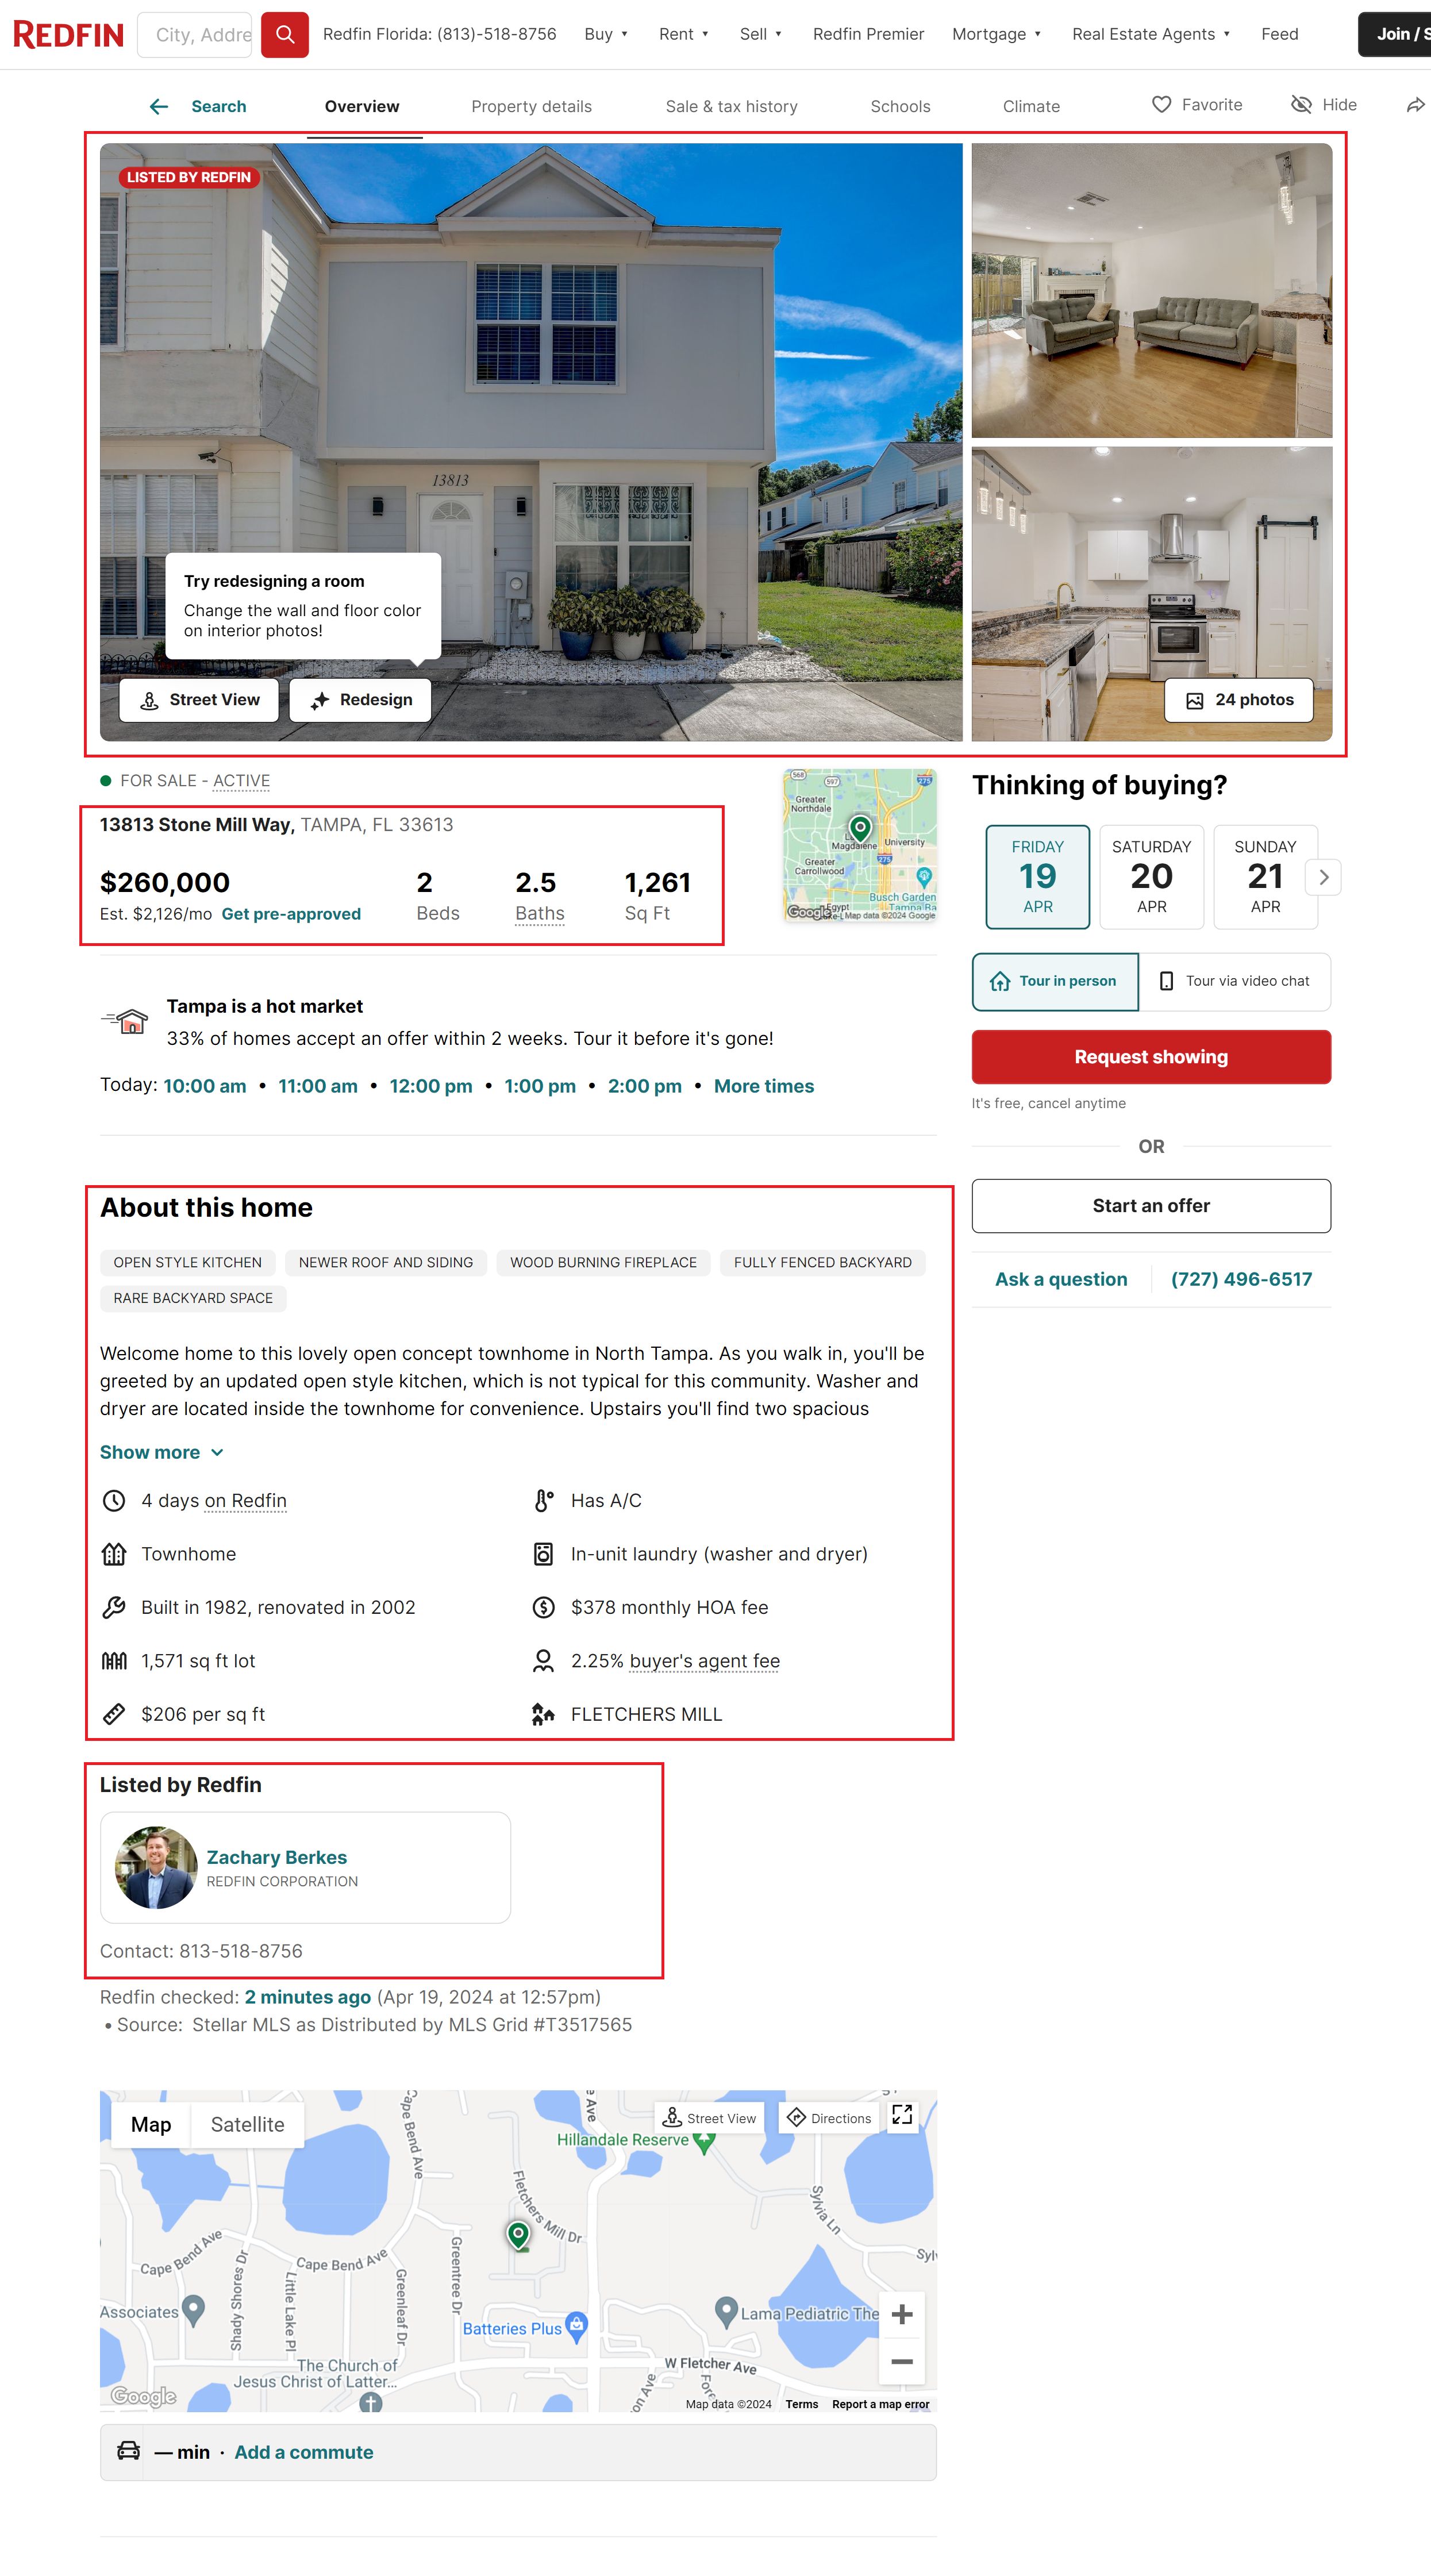 Redfin data from property page